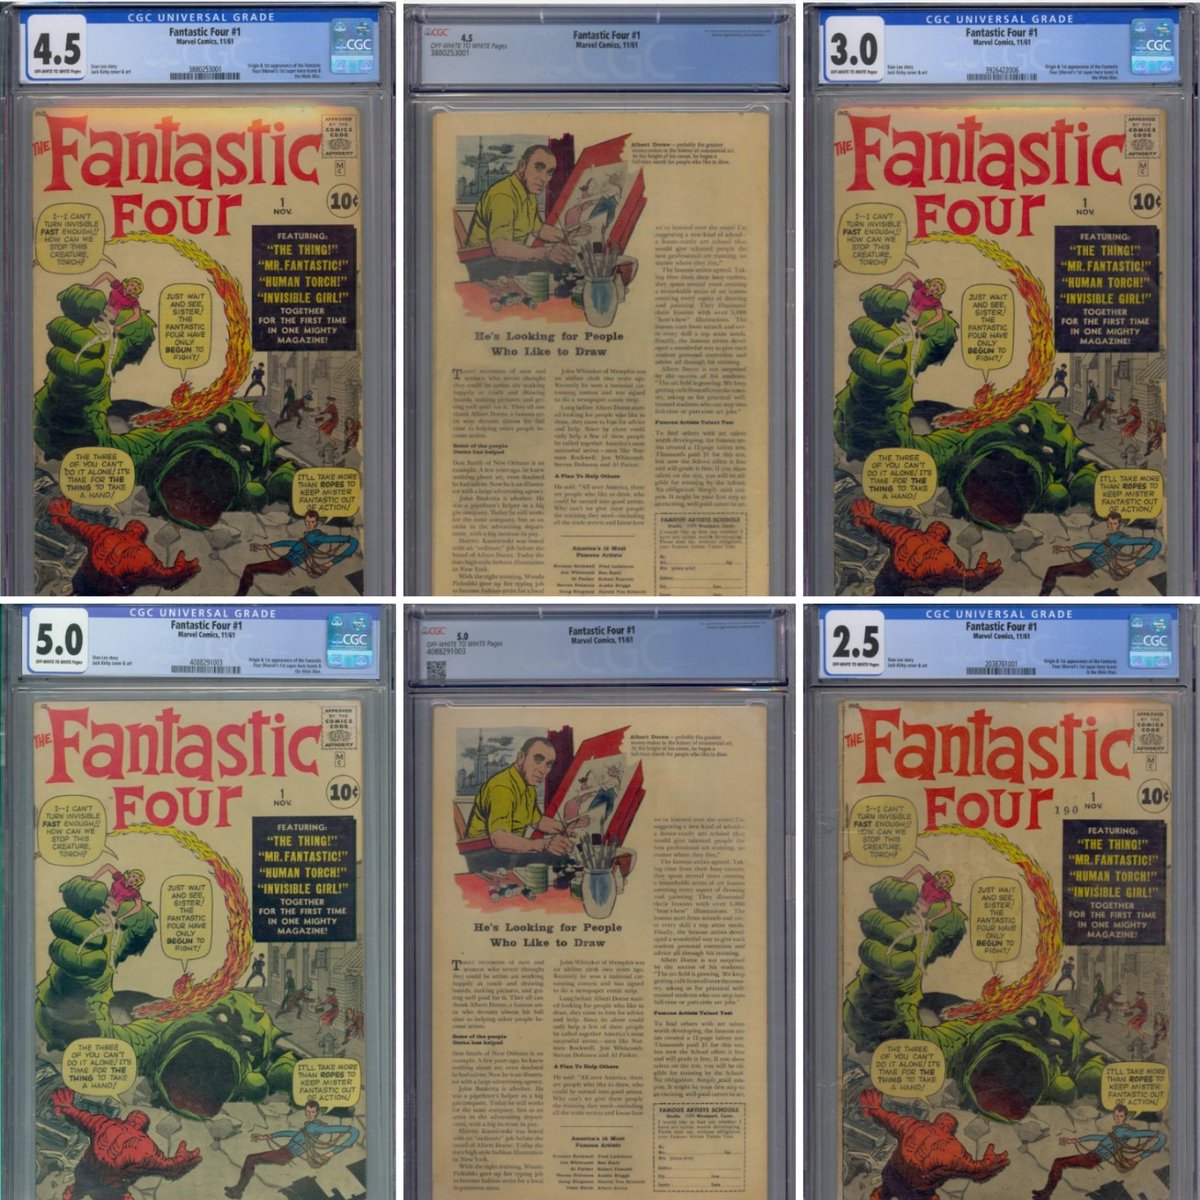 Just added some fantastic additions to our stock! Check them out on eBay and HipComic.

#comics #comicbooks #cgc #cgccomics #fantasticfour #firstappearance #1stappearance #marvelcomics #marvel #igcomicfamily #igcomiccommunity #igcomicbooks #igcomics #igcomicbookfamily